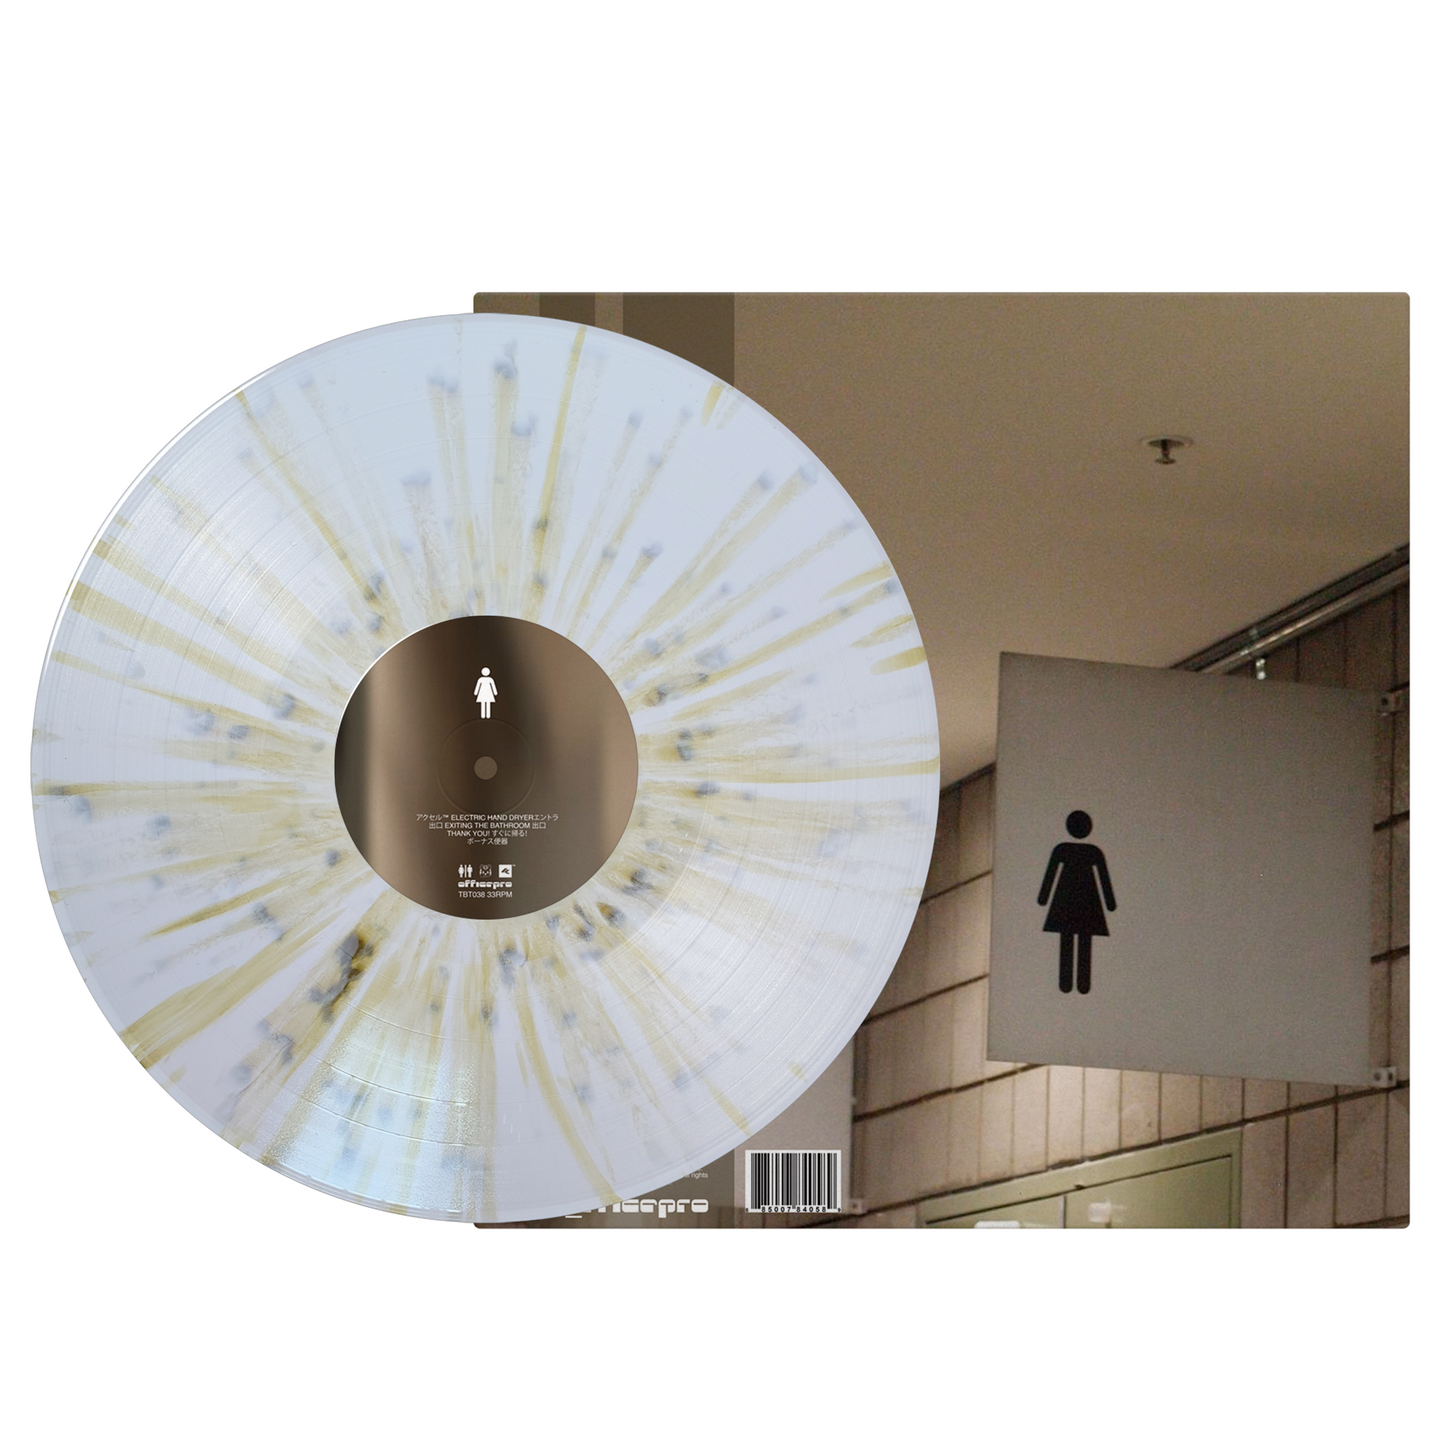 Welcome to the Bathroom! 公衆トイレ - Limited Edition 12" Splatter Vinyl LP